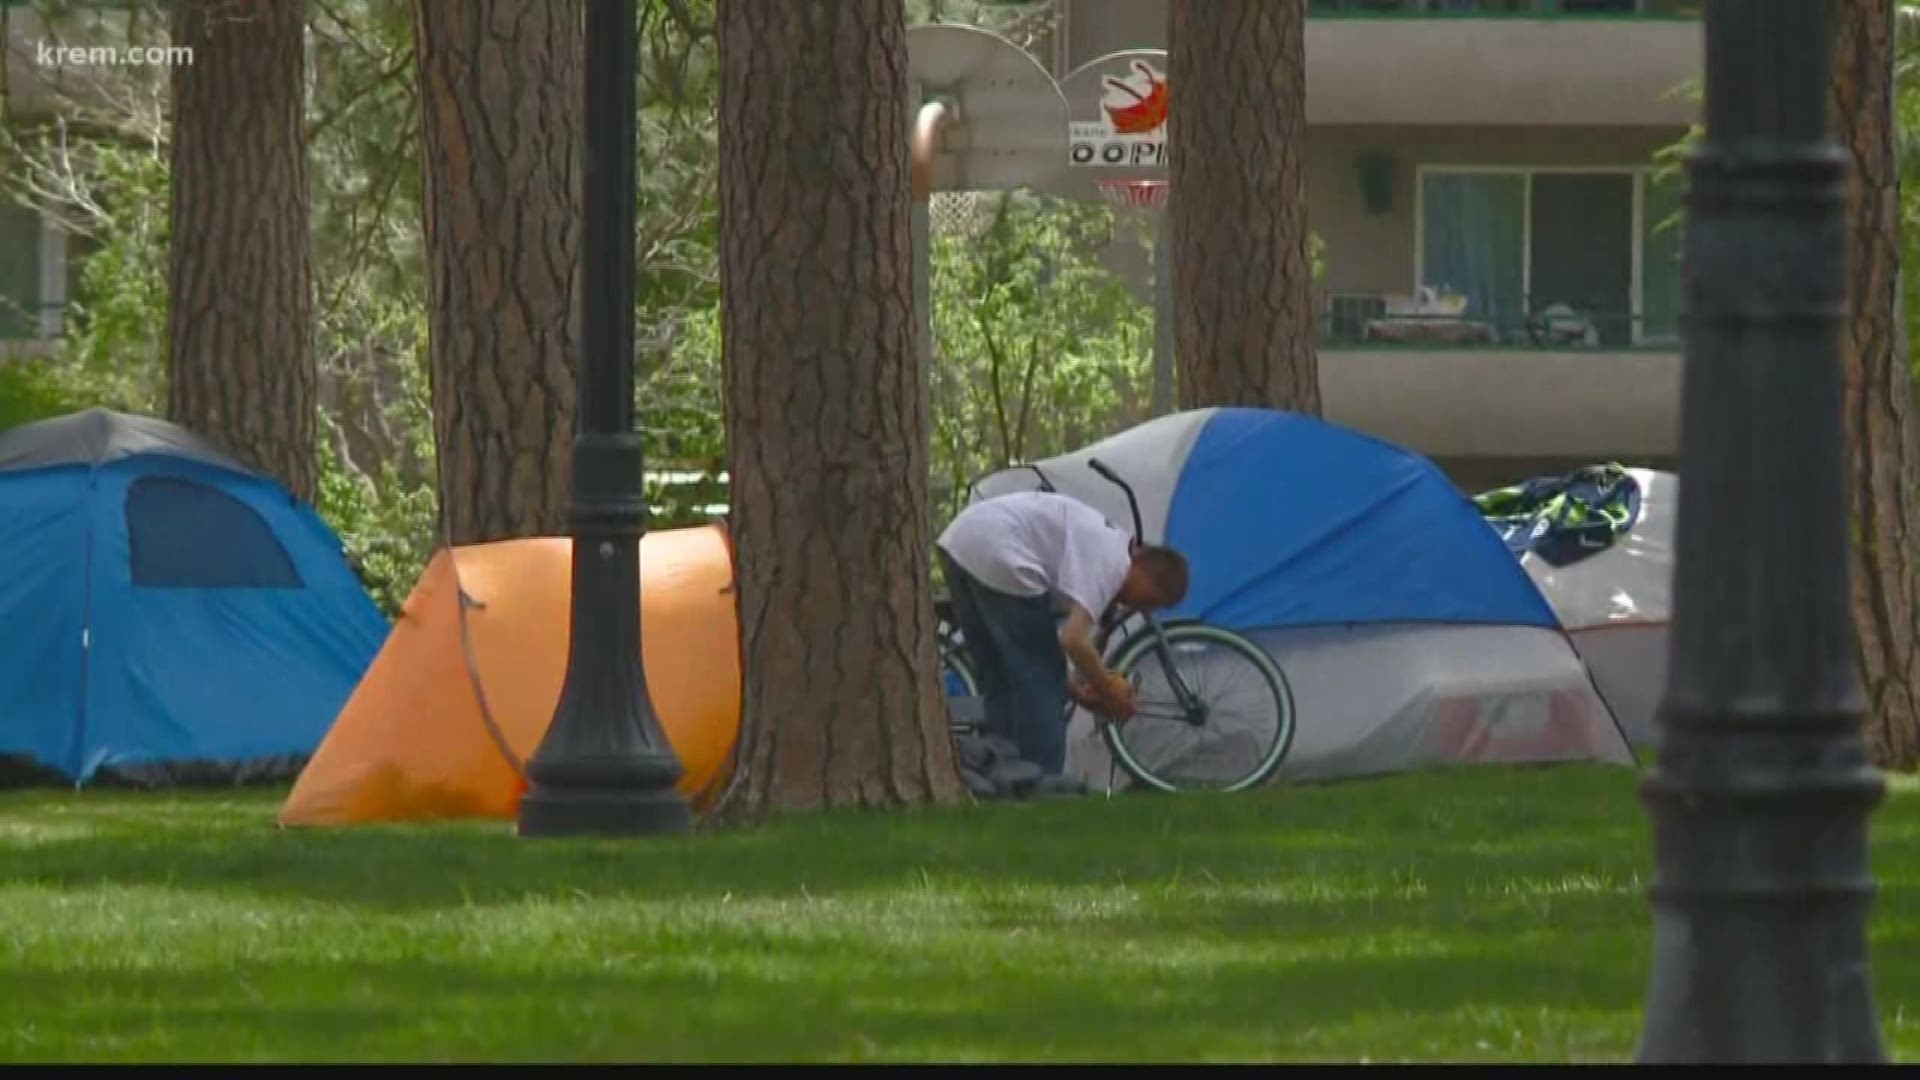 Homeless residents have set up tents in the park and KREM reporters on scene say it is littered with trash.